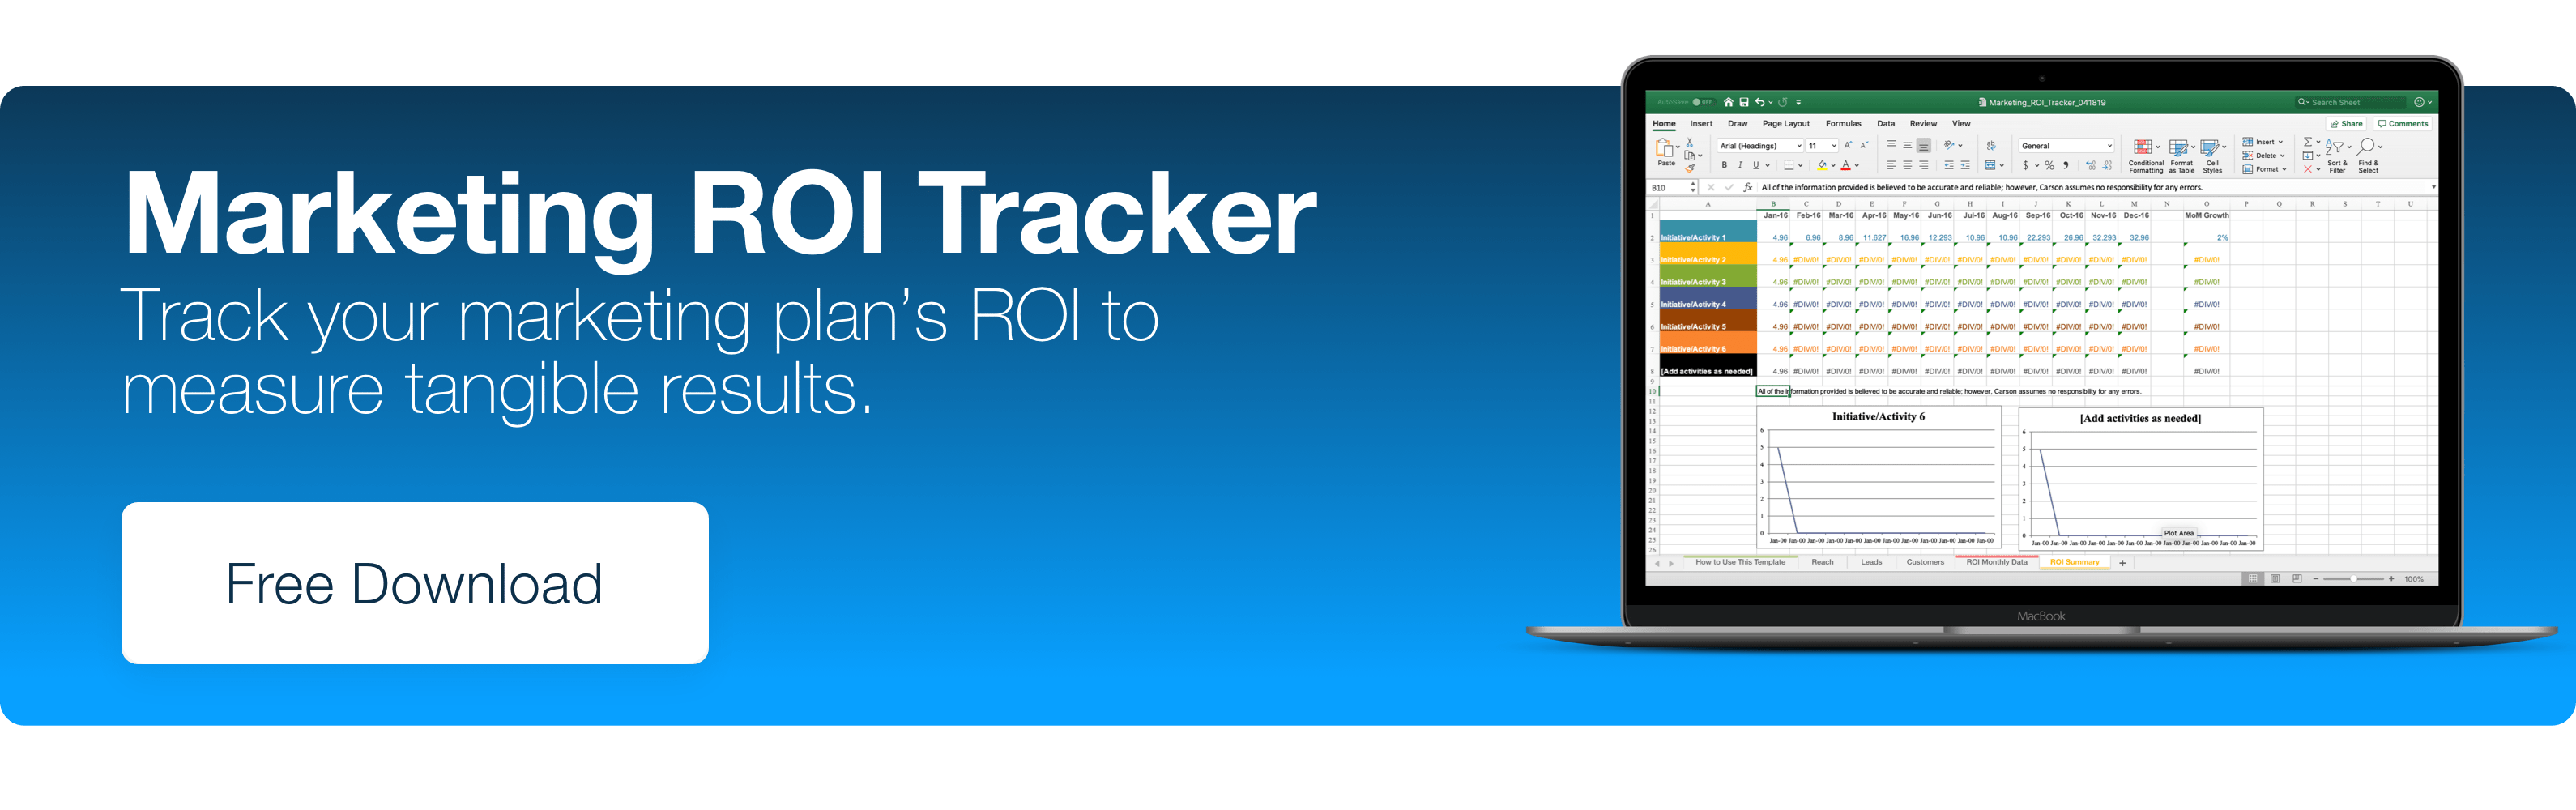 Marketing ROI Tracker. Track your marketing plan's ROI to measure tangible results. Free Download